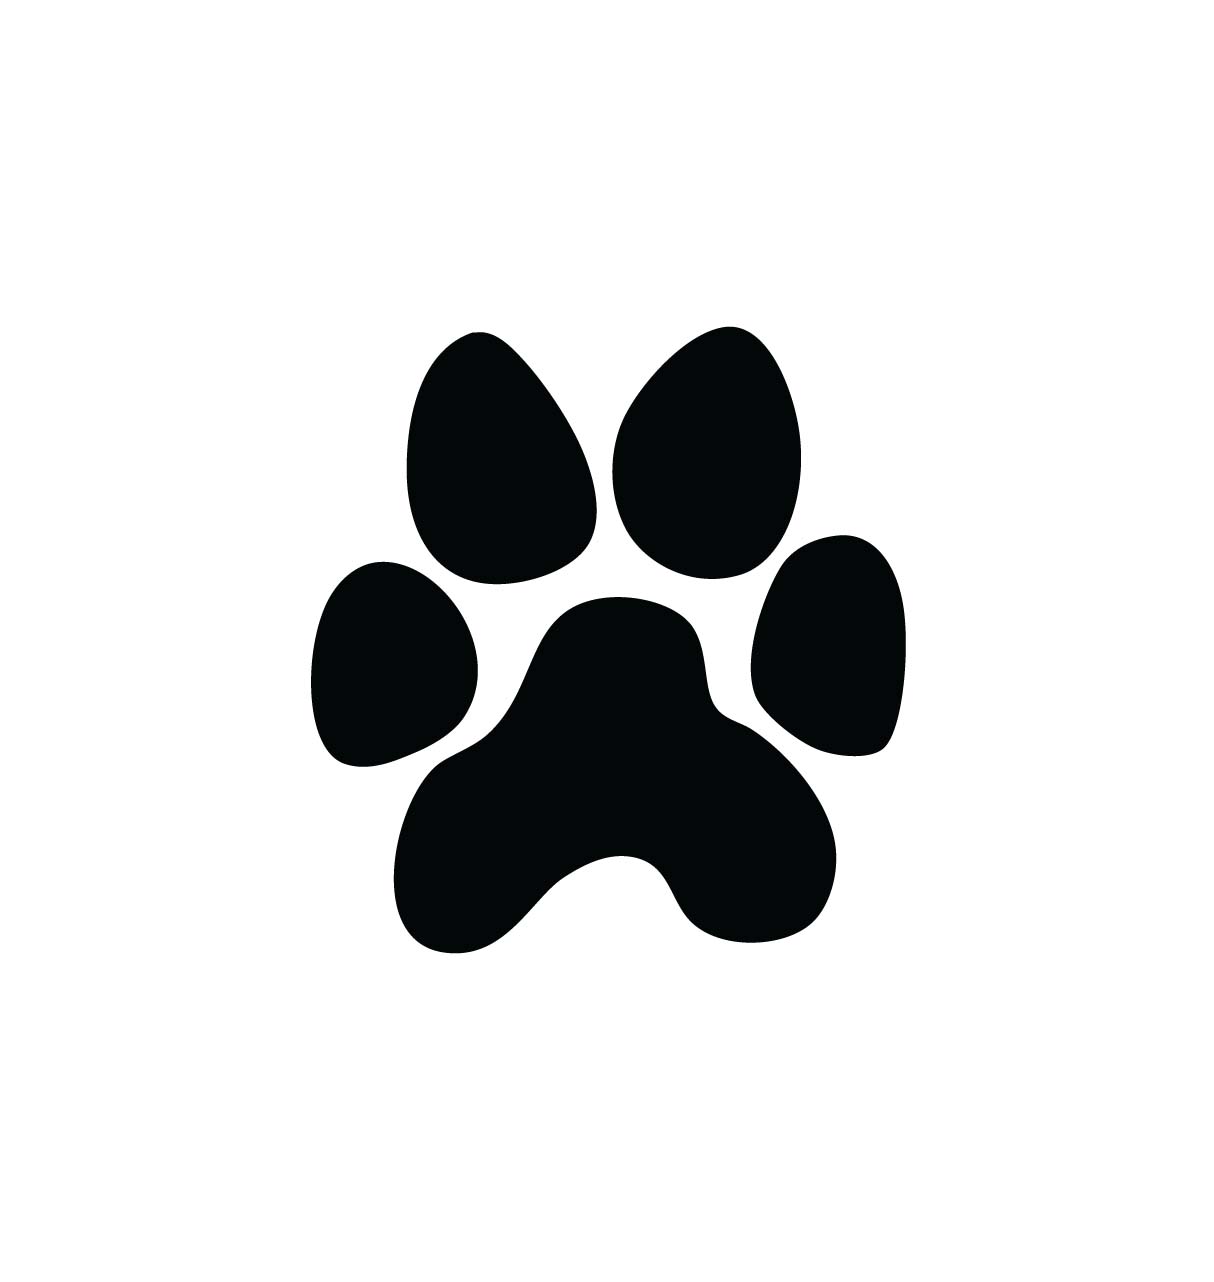 Paw print wildcats on dog paws paw tattoos and clip art image 2 - Clipartix